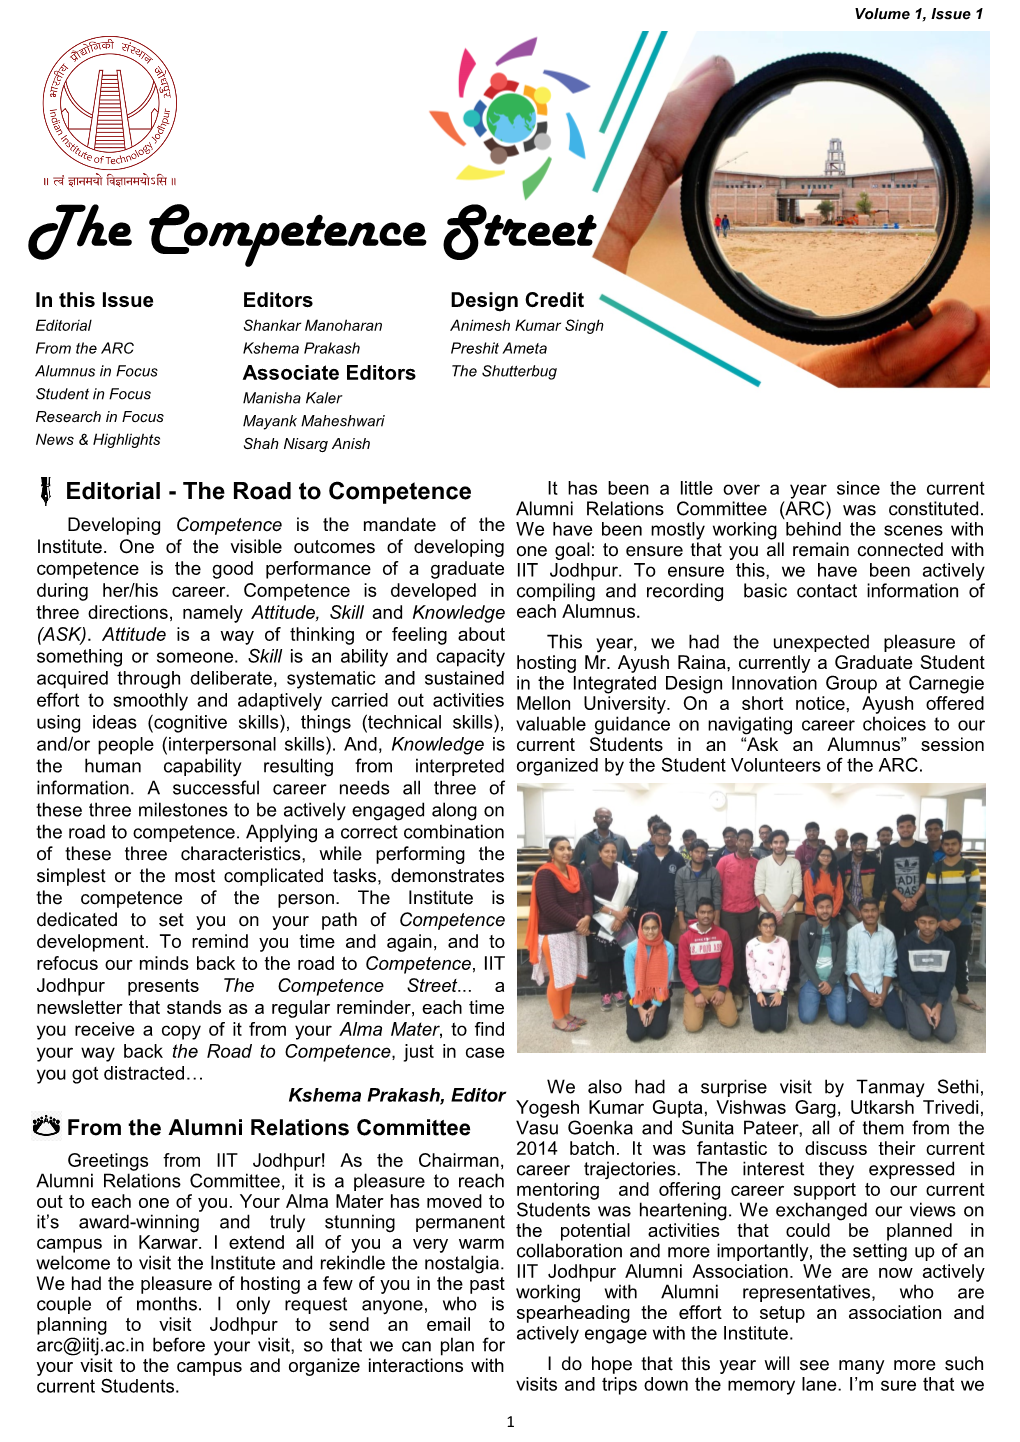 The Competence Street